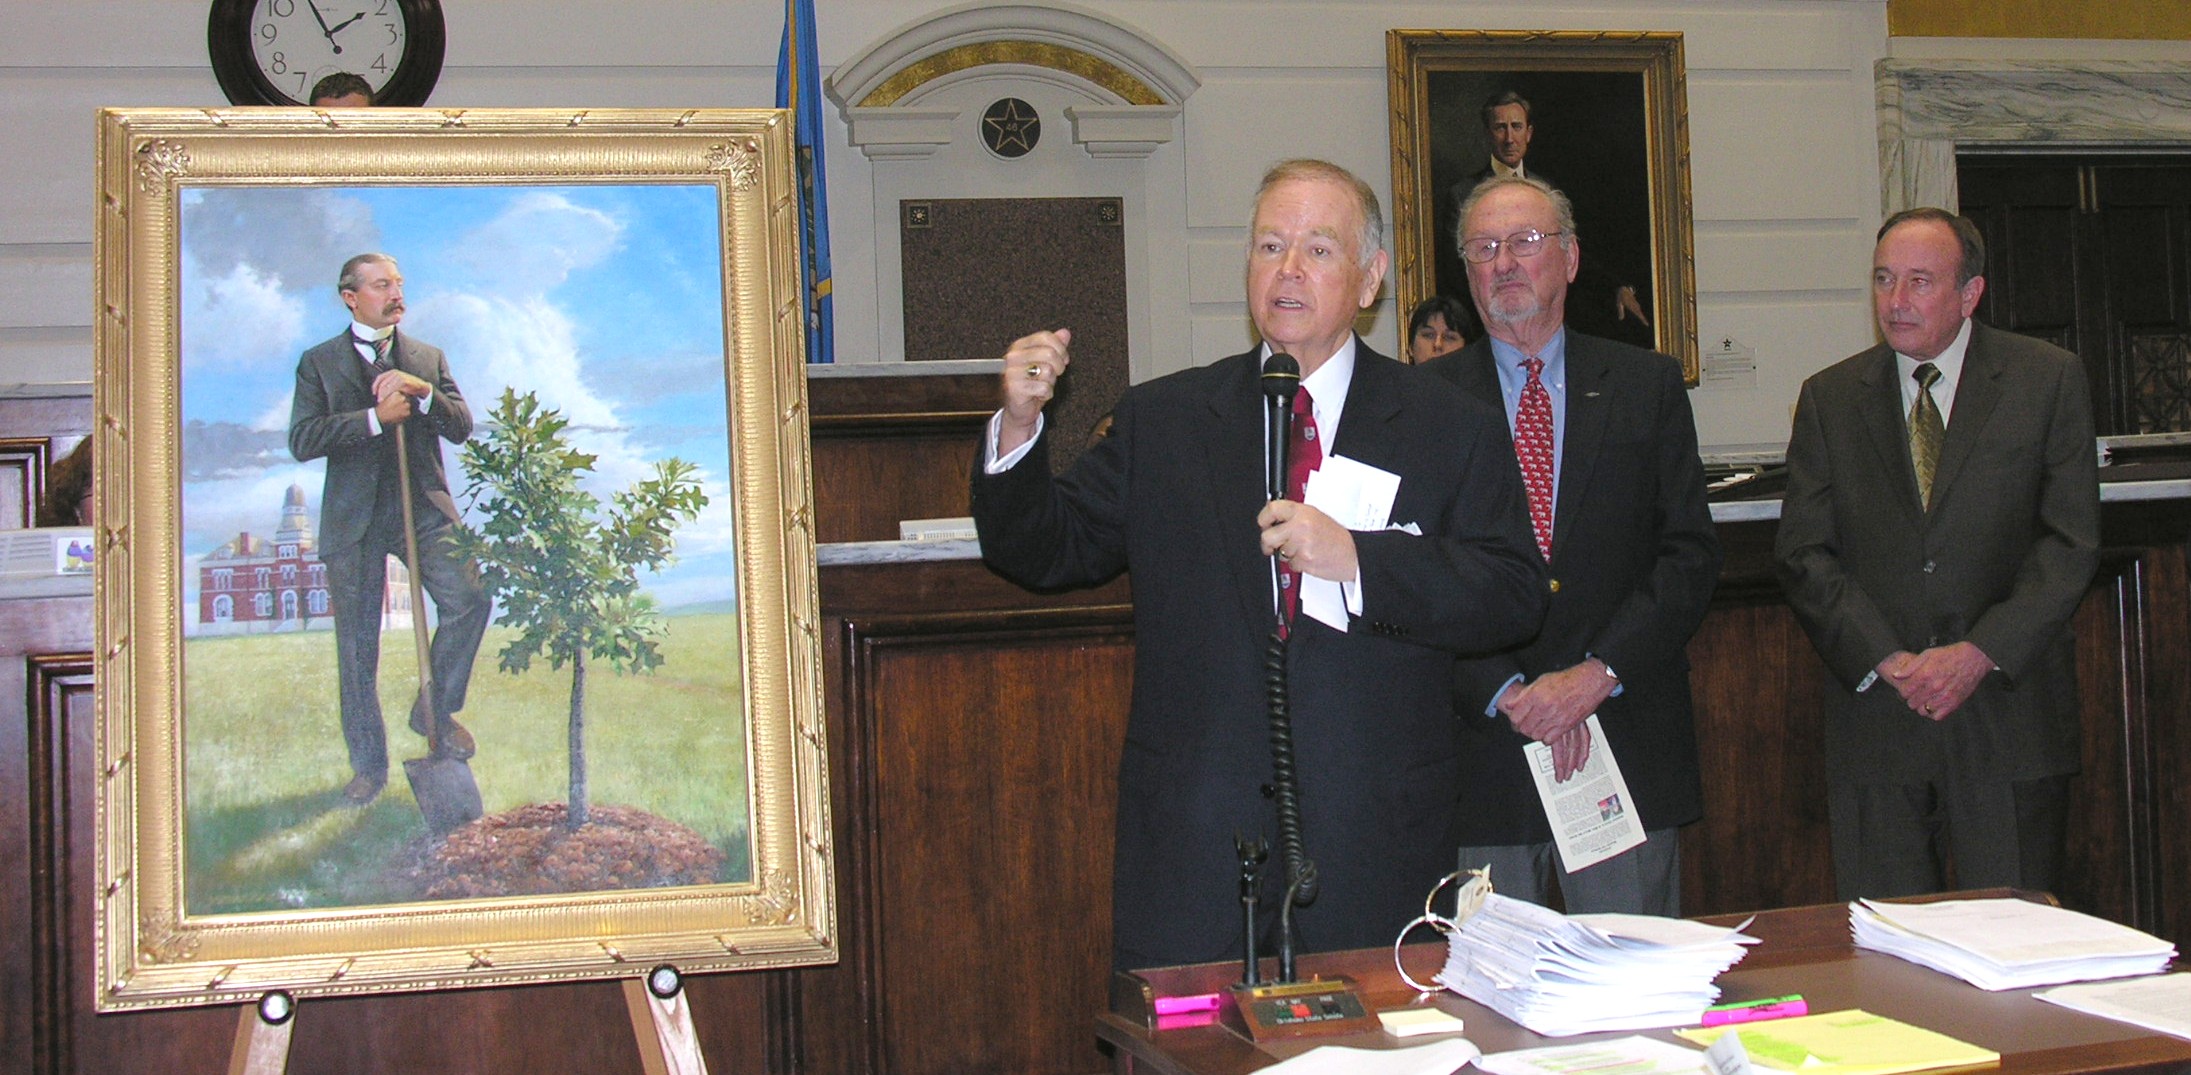 OU President David Boren discusses the legacy of the university's first President David Ross Boyd while Charles Ford and Senator Cal Hobson listen.